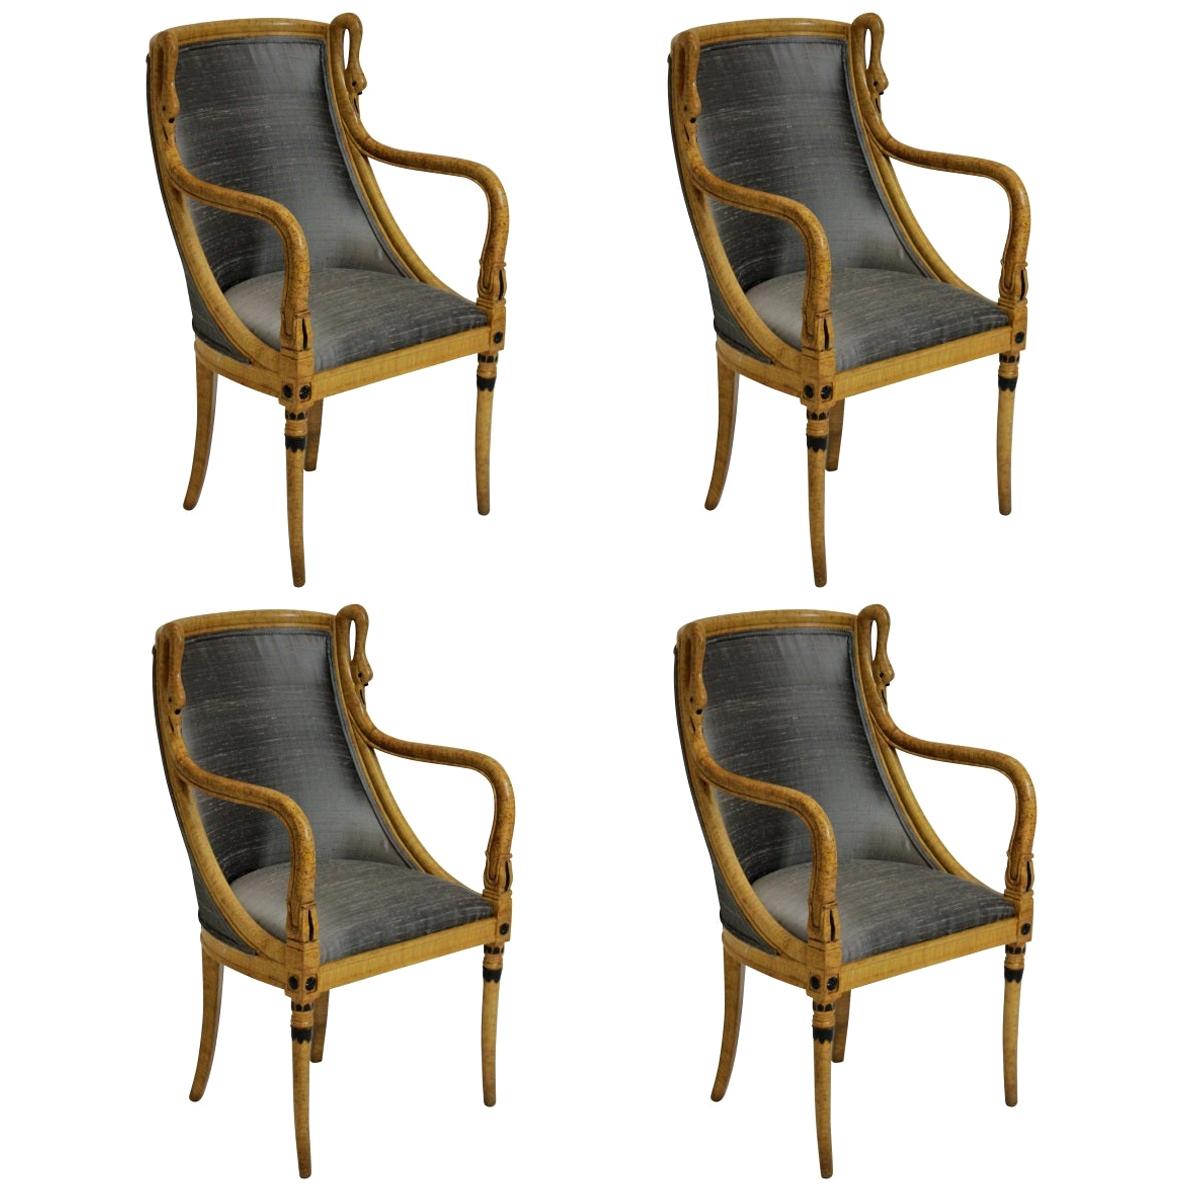 Set of Four 19th Century French Empire Swan Neck Dining Chairs